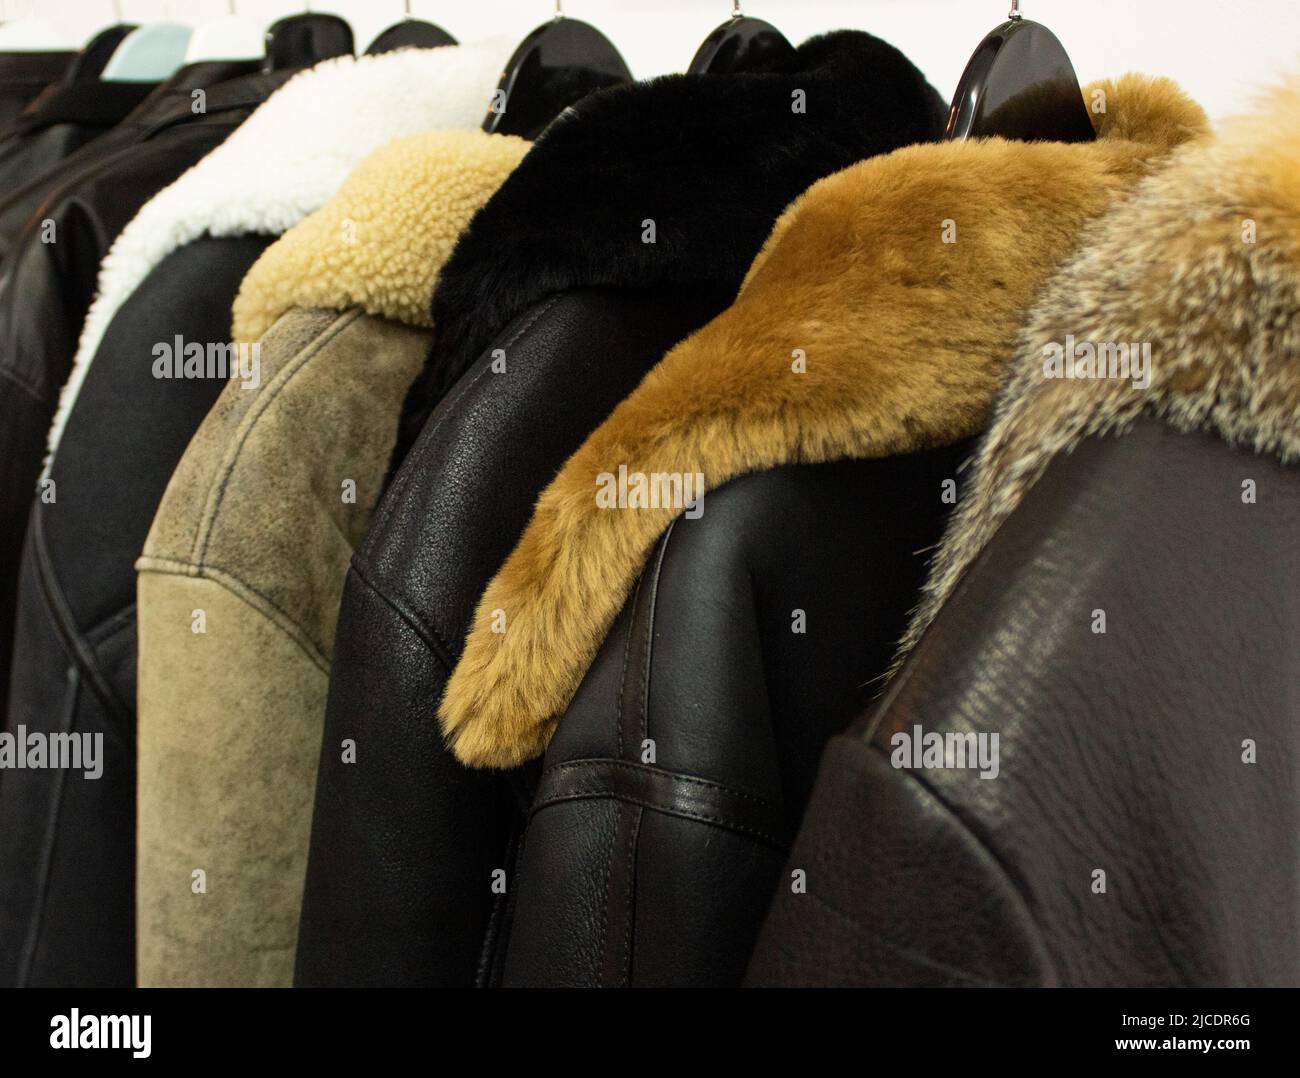 Collection of leather jackets on hangers in the shop. Many new men's winter jackets with fur. Background and closeup texture of leather, Stock Photo